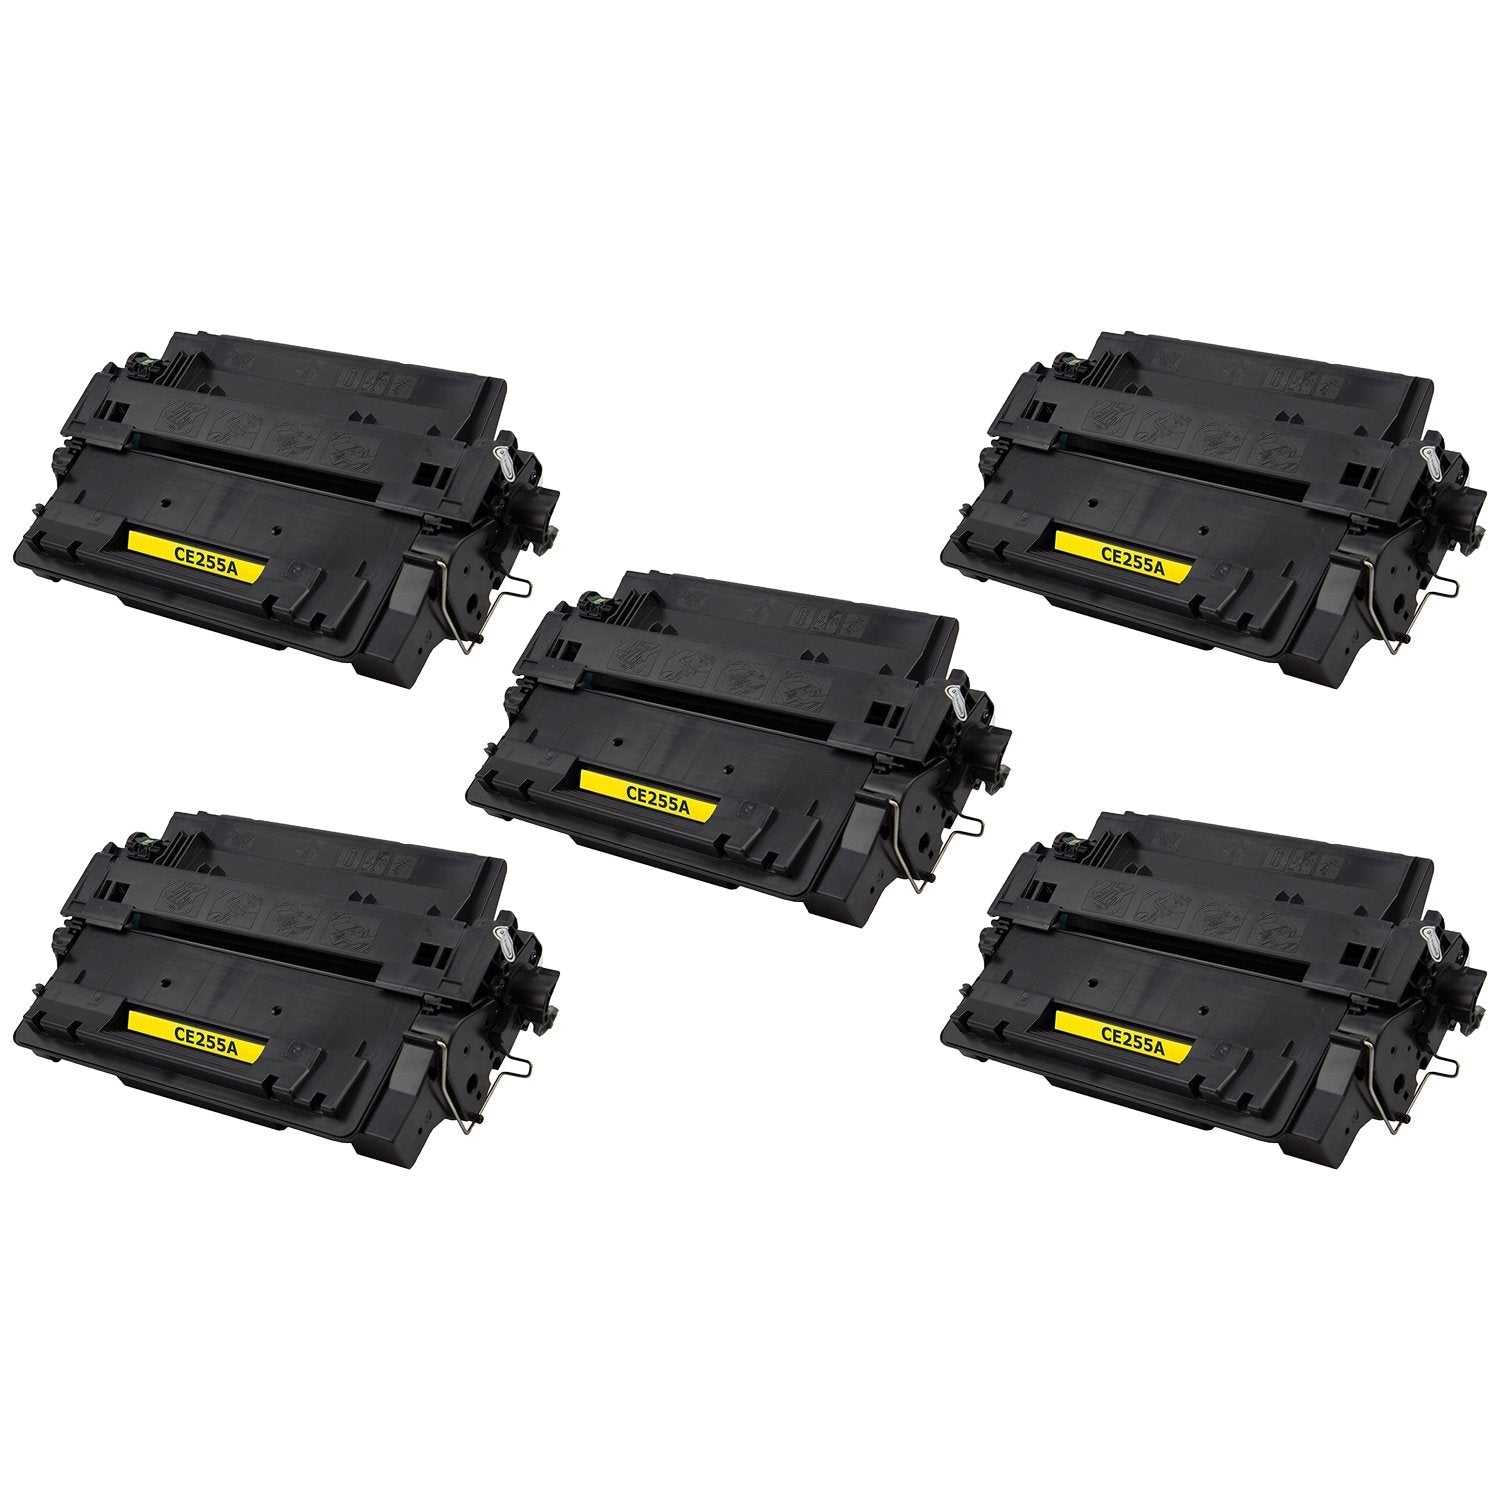 Absolute Toner Compatible CE255A HP 55A Black Toner Cartridge | Absolute Toner HP Toner Cartridges